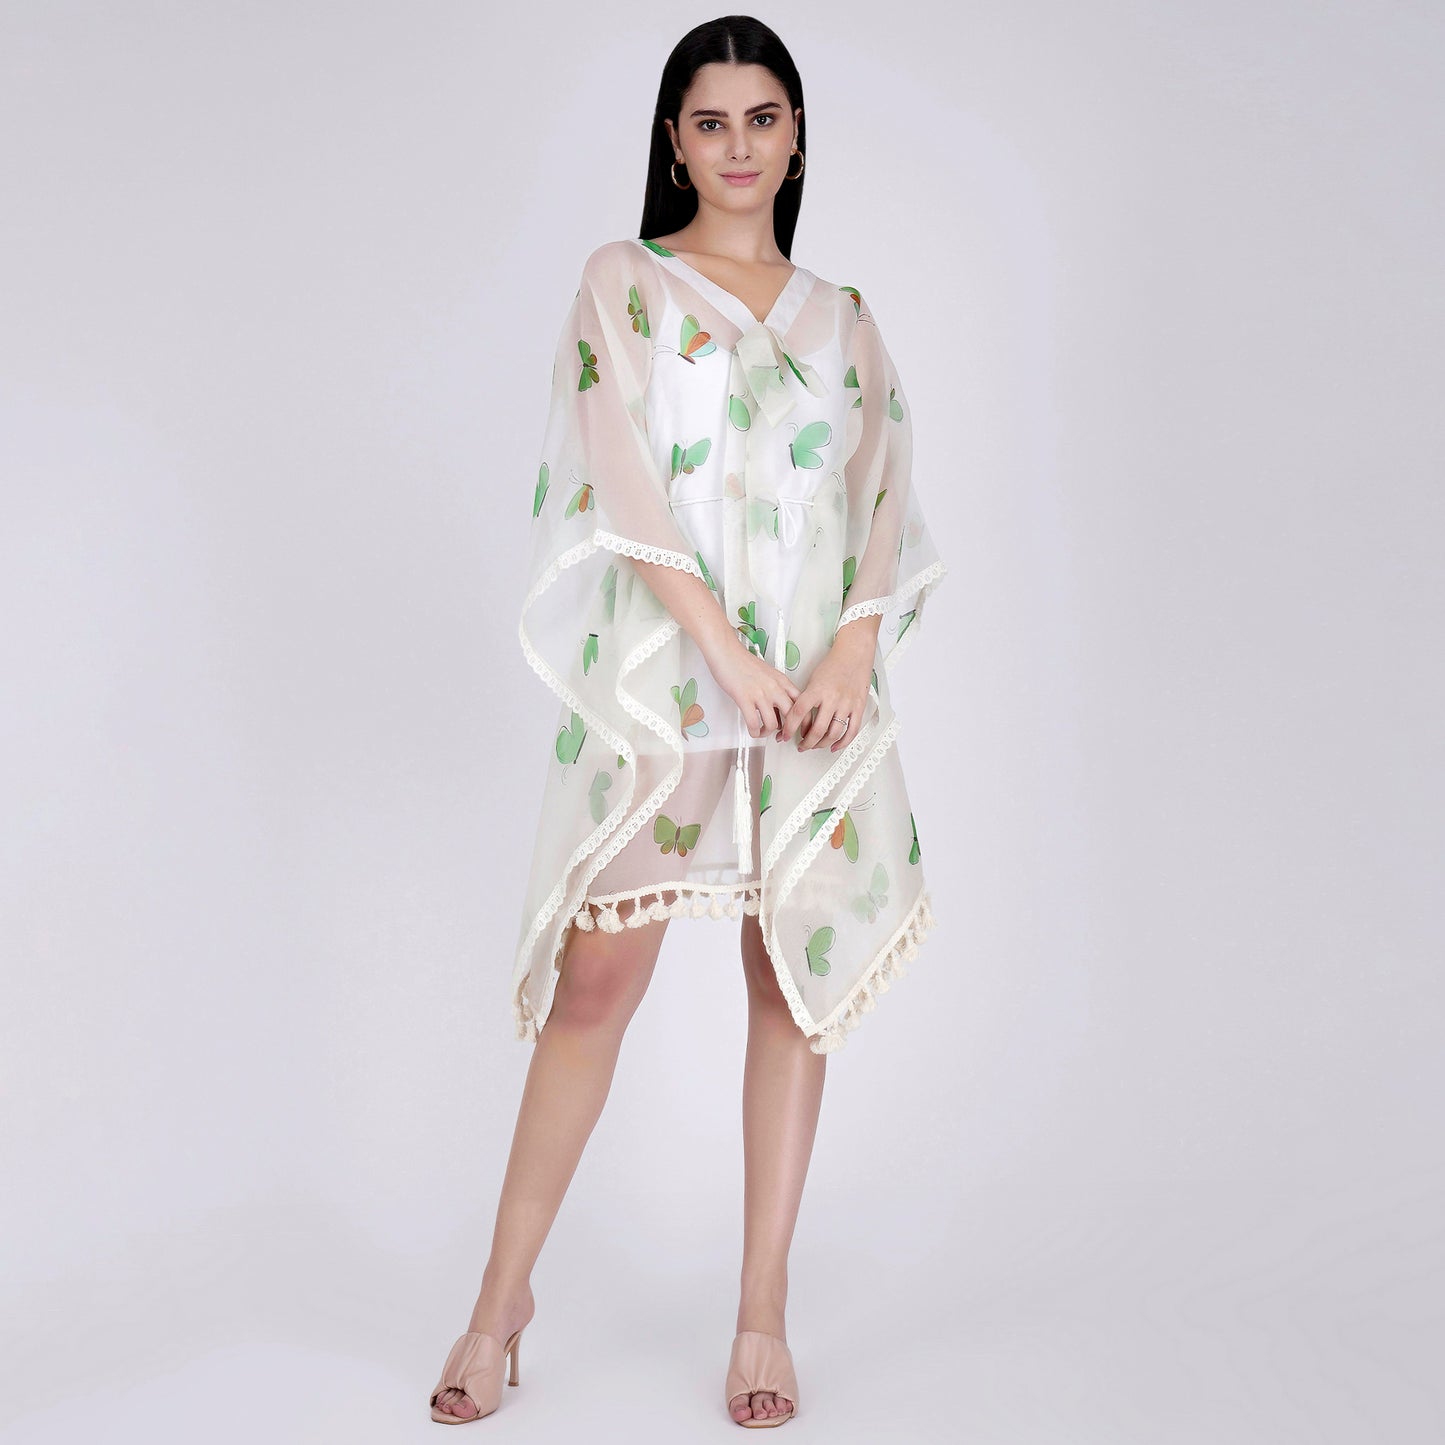 Image of Introducing the NEON GREEN BUTTERFLY MID LENGTH KAFTAN, designed to make a bold statement. Made from high-quality polyester, the kaftan has a lightweight feel that offers exceptional comfort all day long. The vibrant neon green butterfly pattern brings a unique touch to any outfit. The mid-length sleeves create an elegant and sophisticated look. Make a statement with the NEON GREEN BUTTERFLY MID LENGTH KAFTAN. From savoirfashions.com